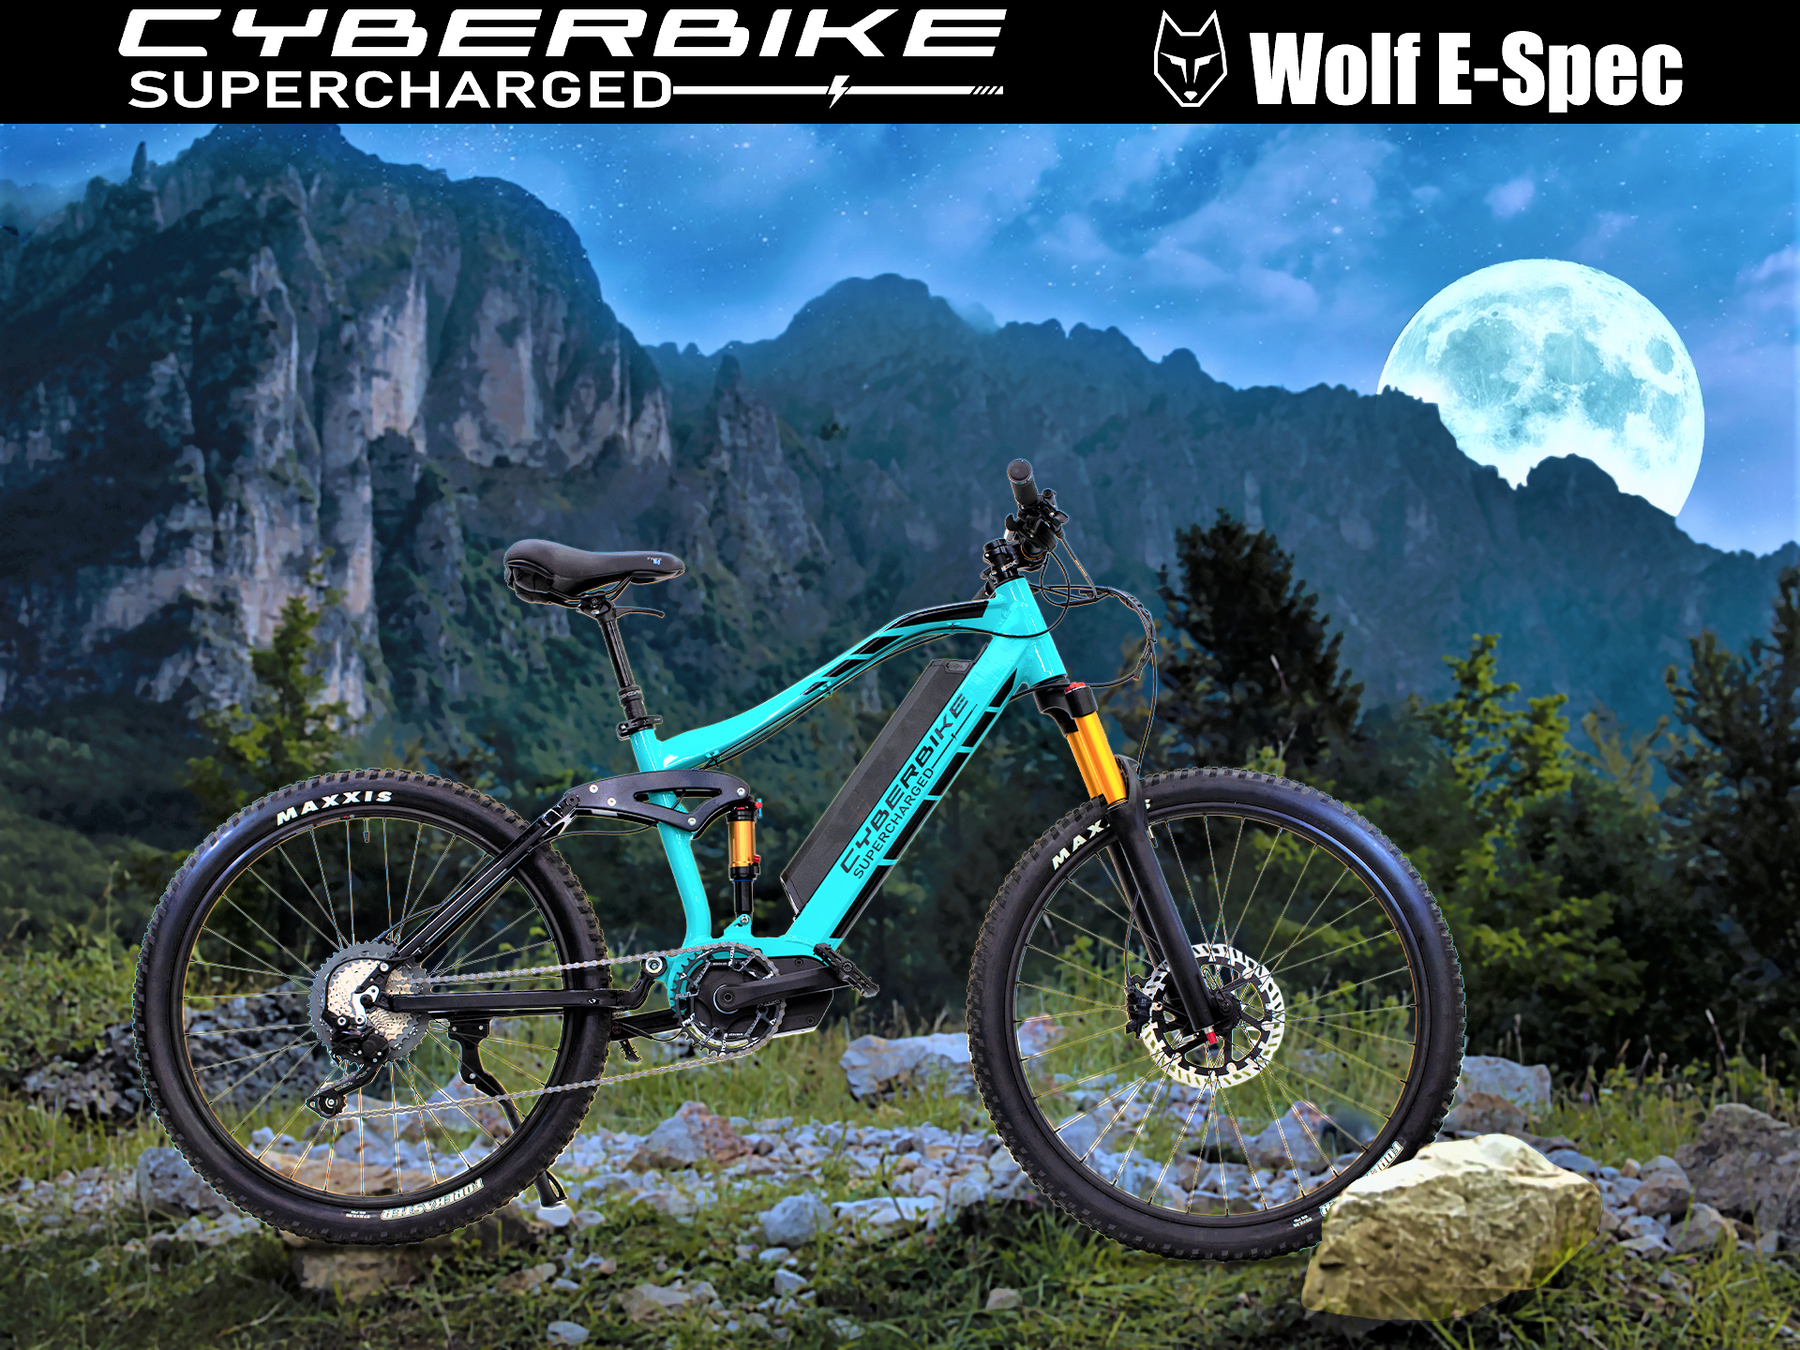 Cyberbike Mullet Pro Performance mid-drive eMTB electric mountain bike